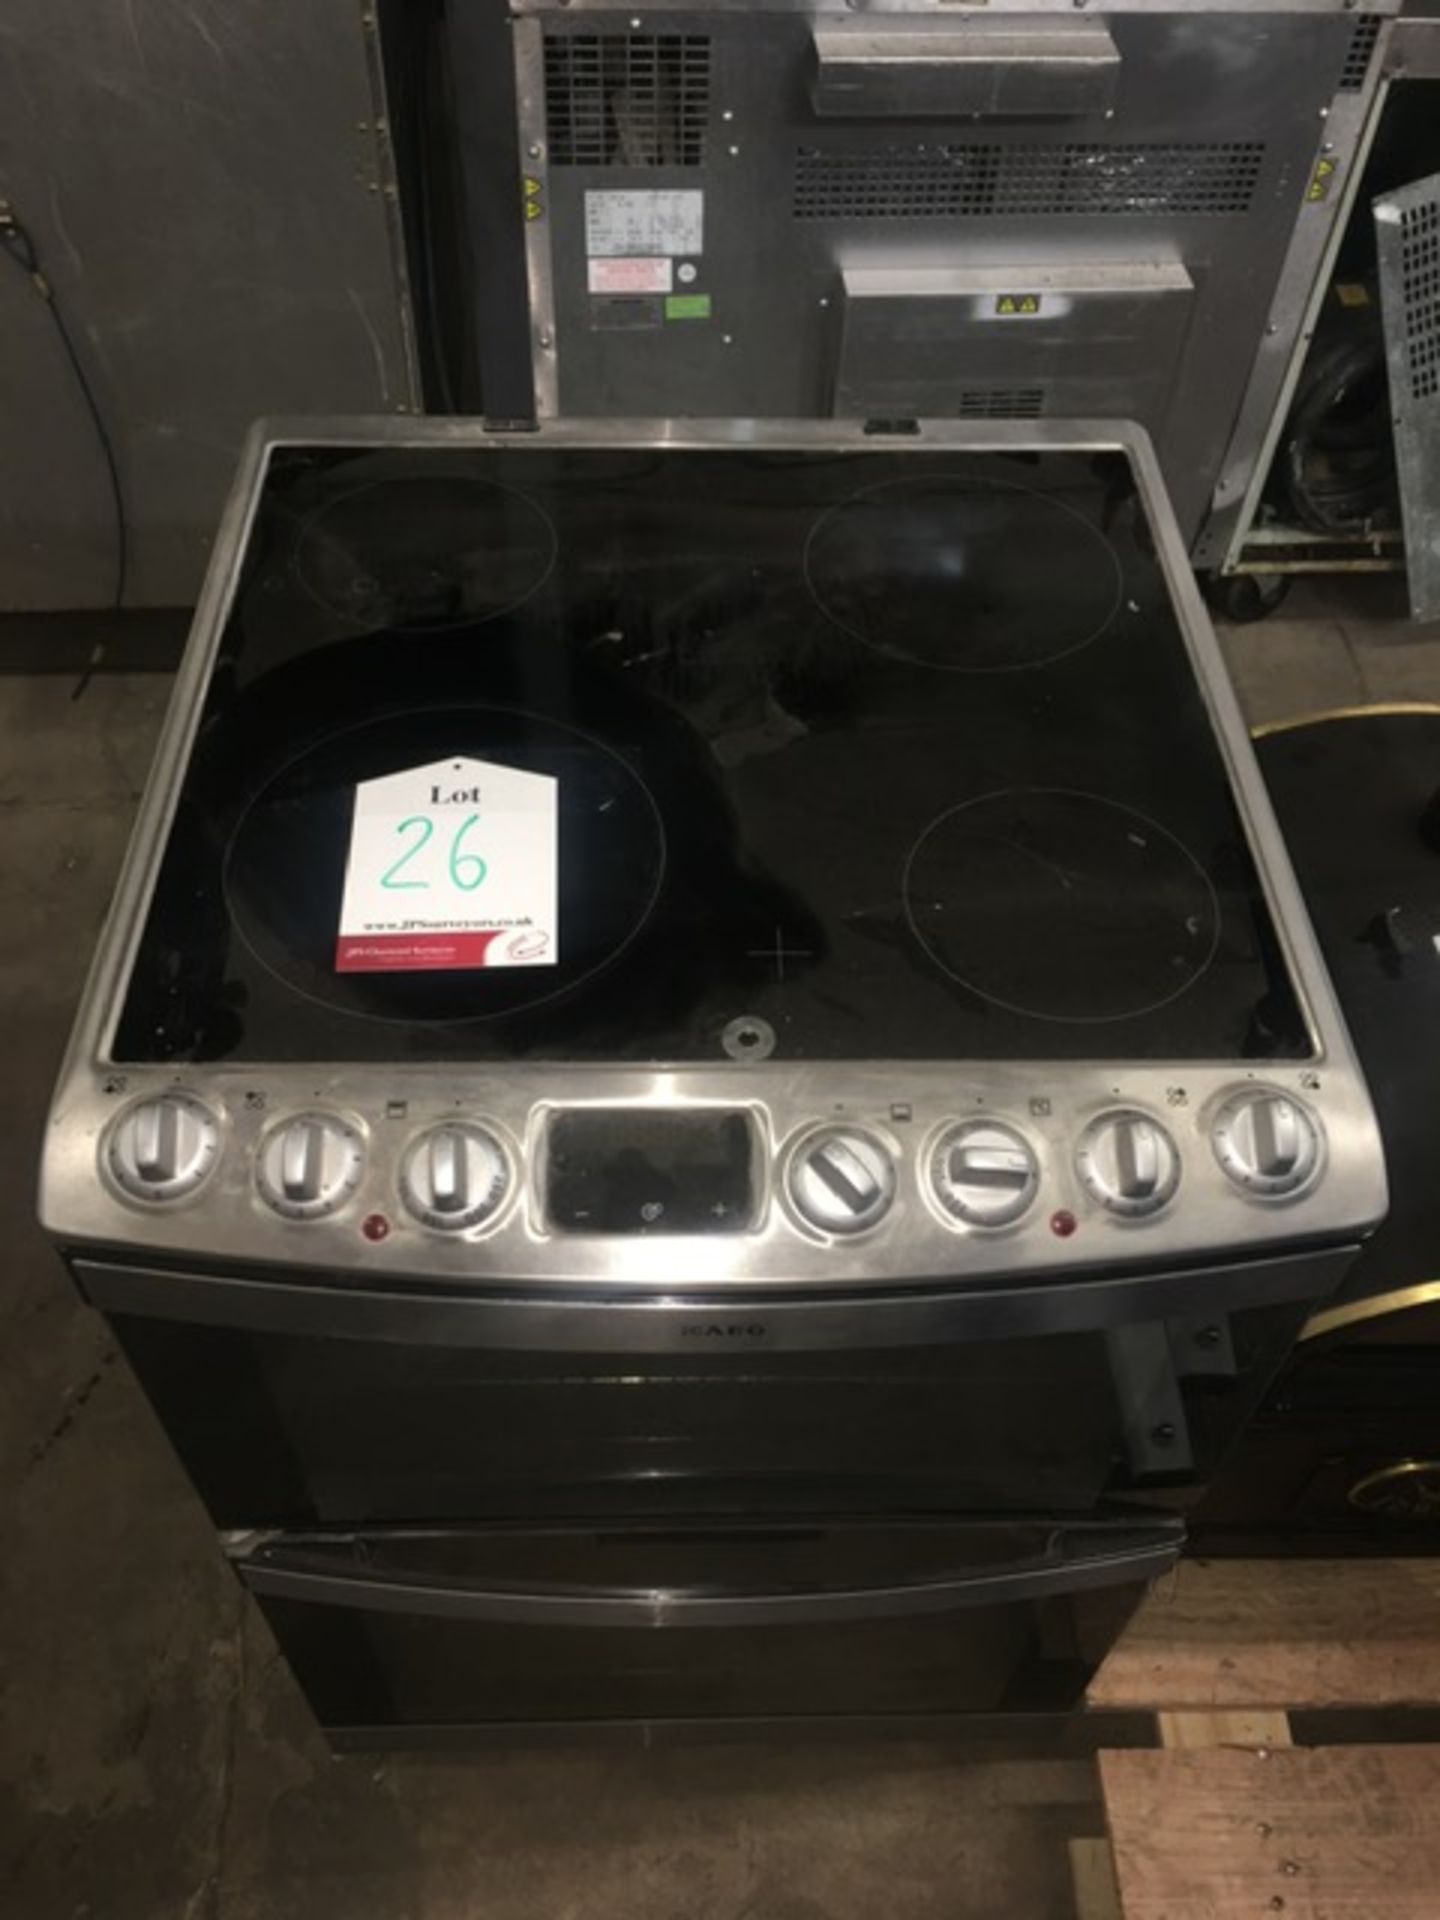 AEG 43102V-MN 4 Burner Electric Double Oven - Image 4 of 7